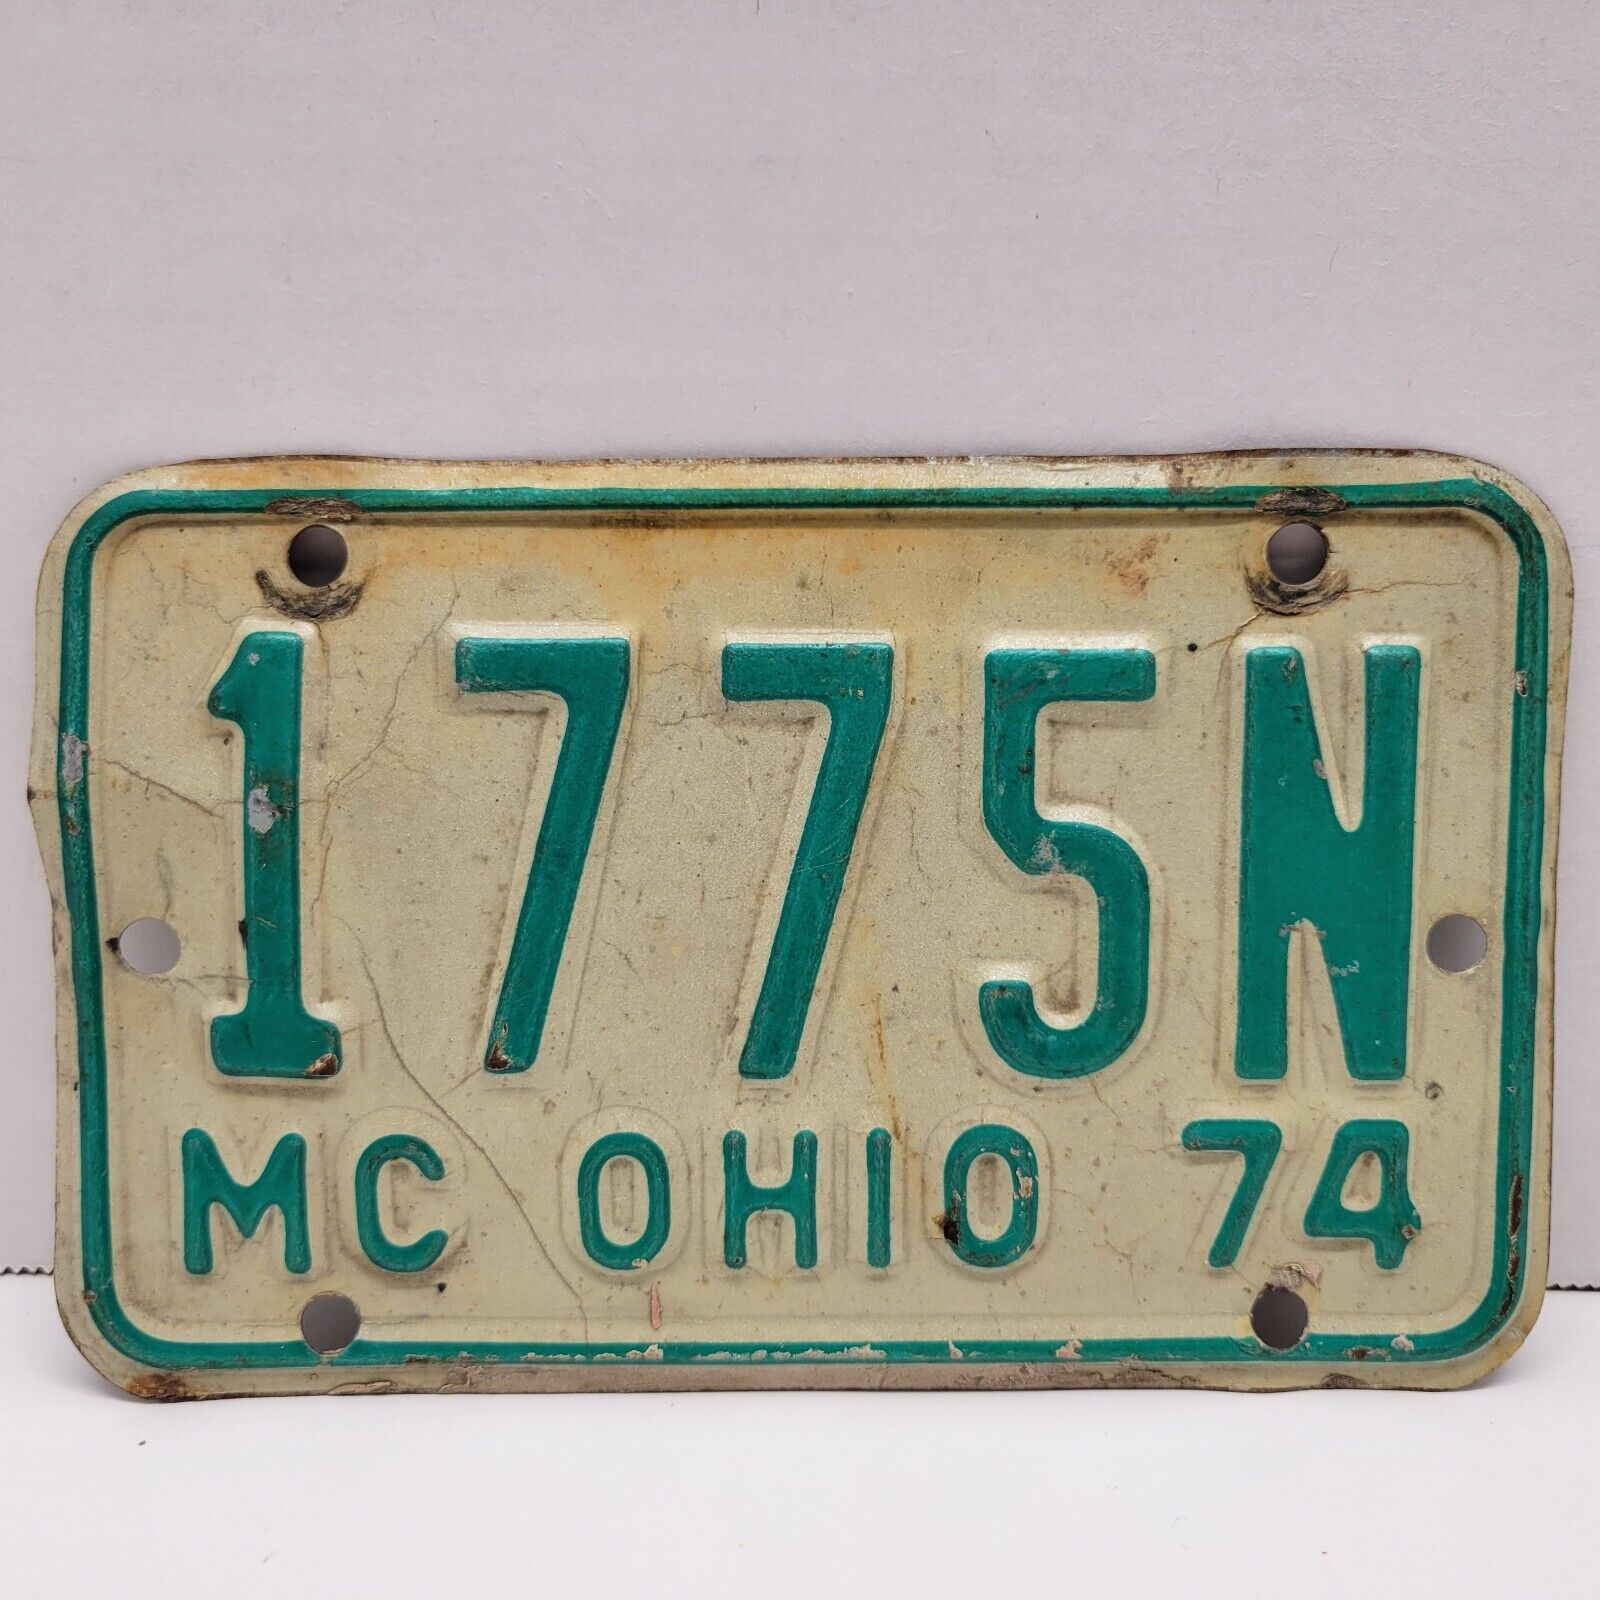 VTG 1974 Ohio Motorcycle License Plate Tag 1775N Revolutionary War Date 1775 